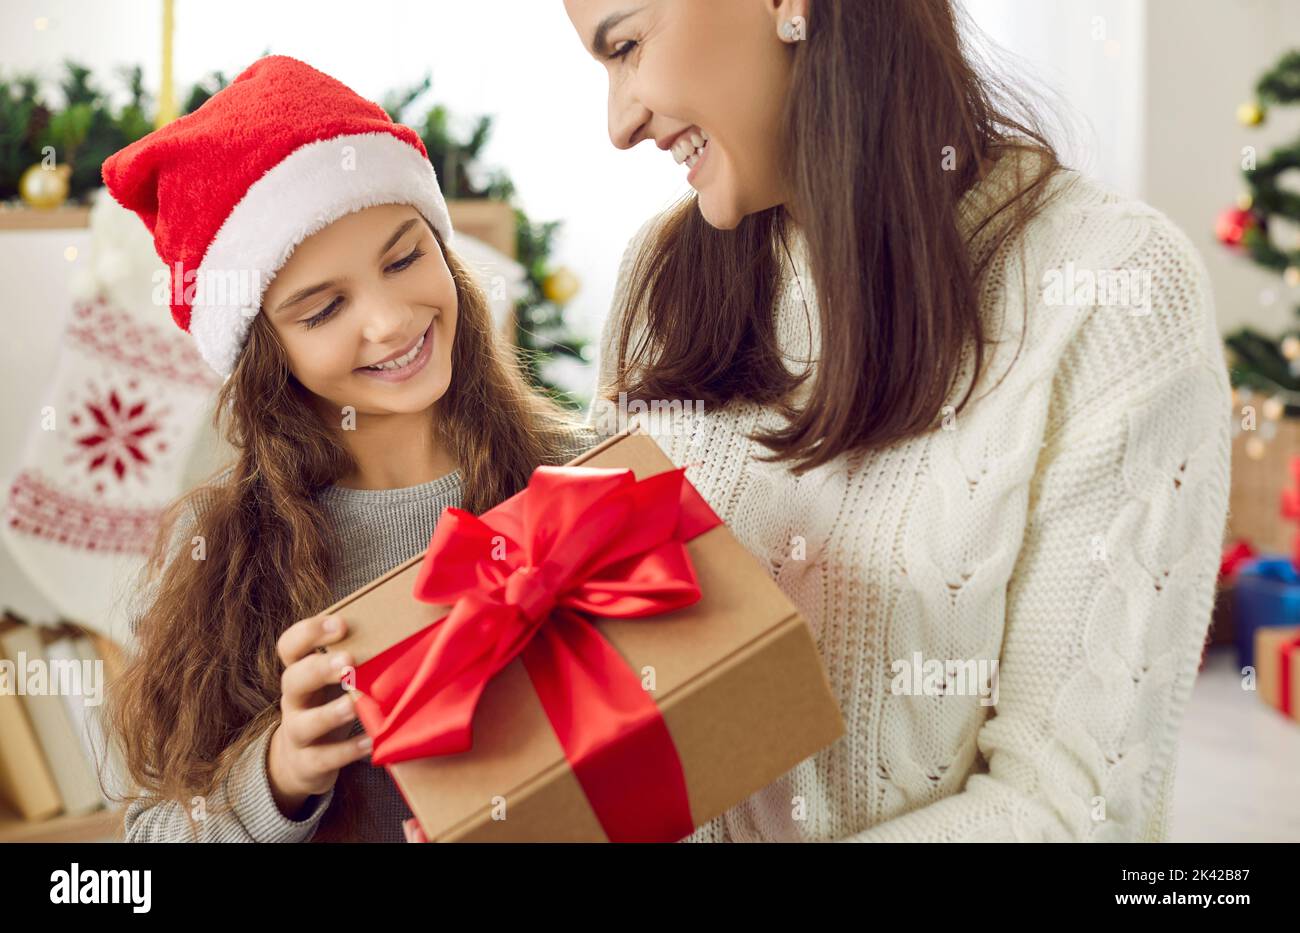 Caring mother congratulate smiling daughter with Christmas Stock Photo